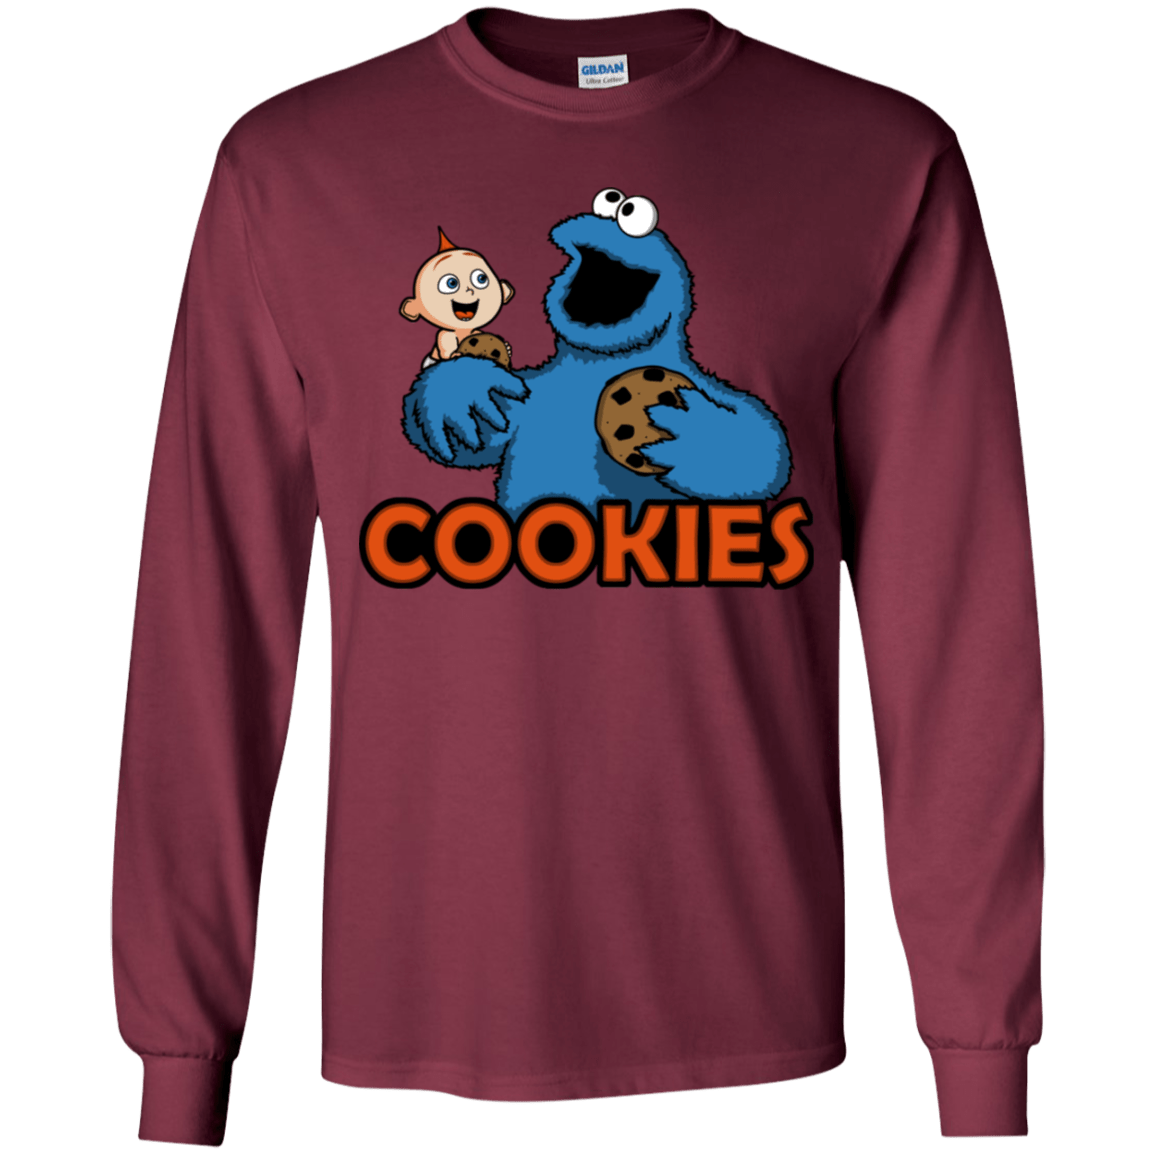 Cookies Youth Long Sleeve T-Shirt